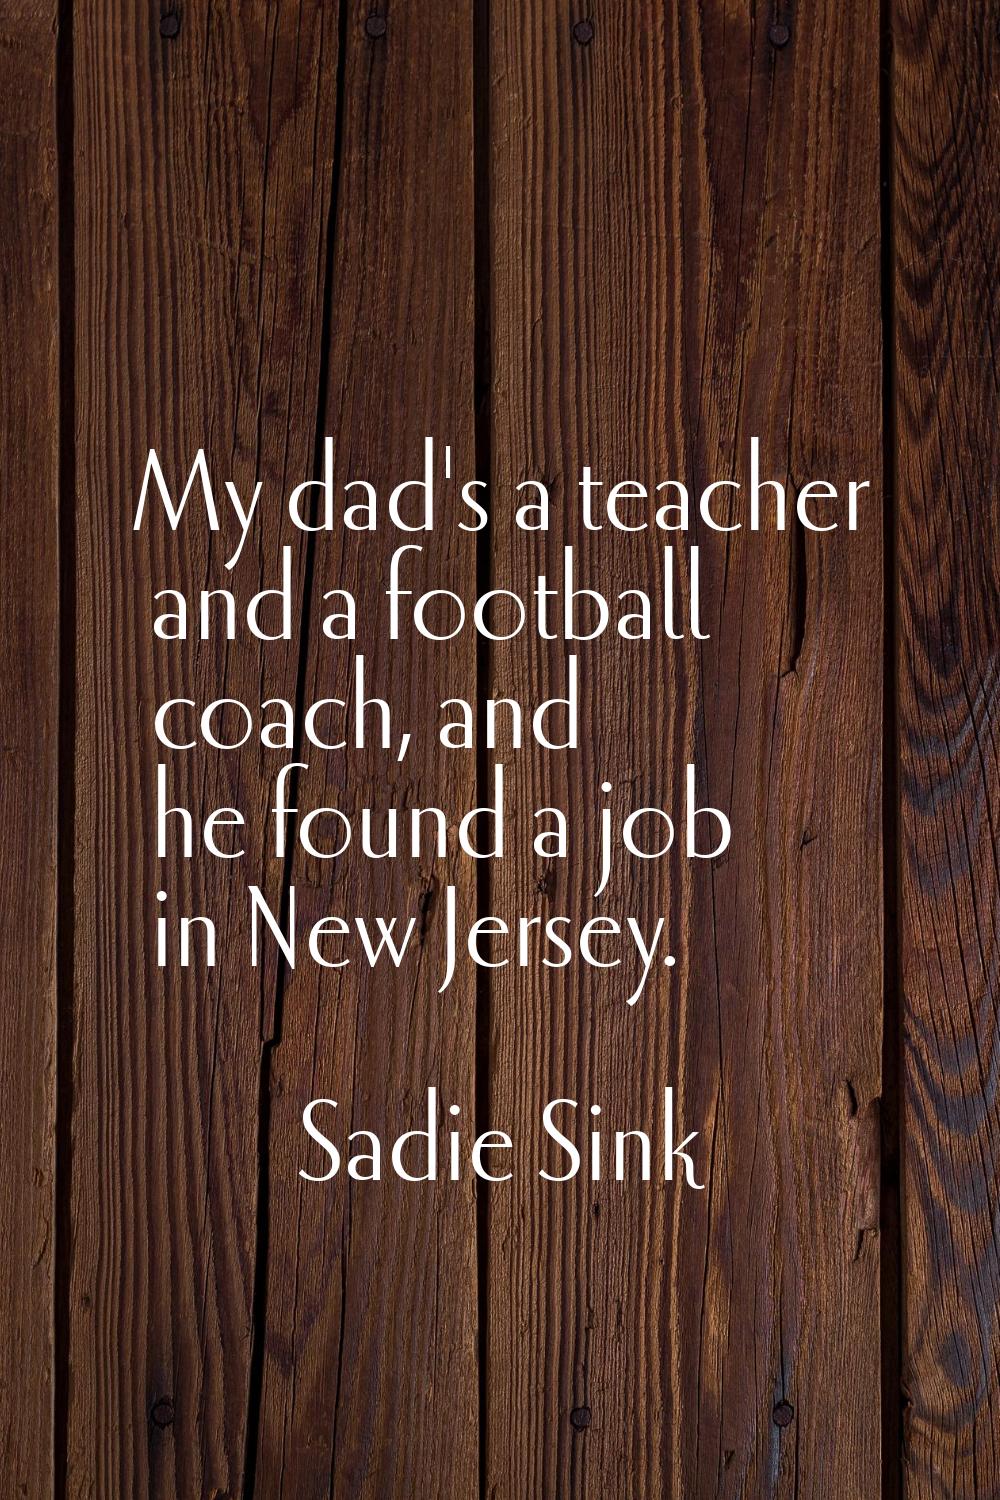 My dad's a teacher and a football coach, and he found a job in New Jersey.